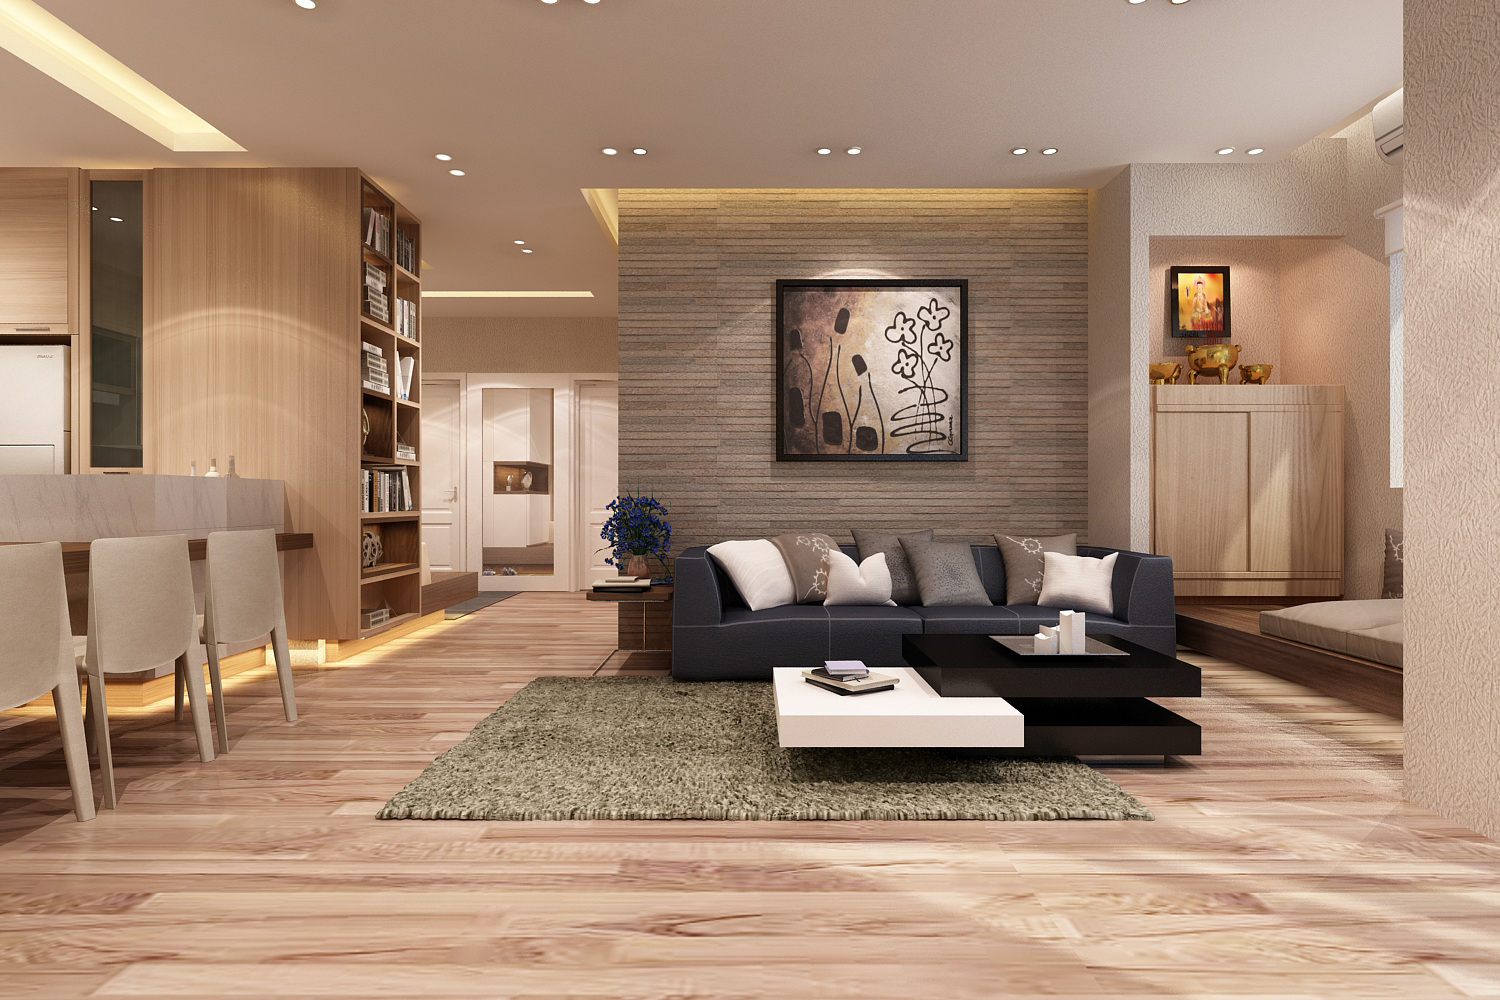 Sample of living room layout